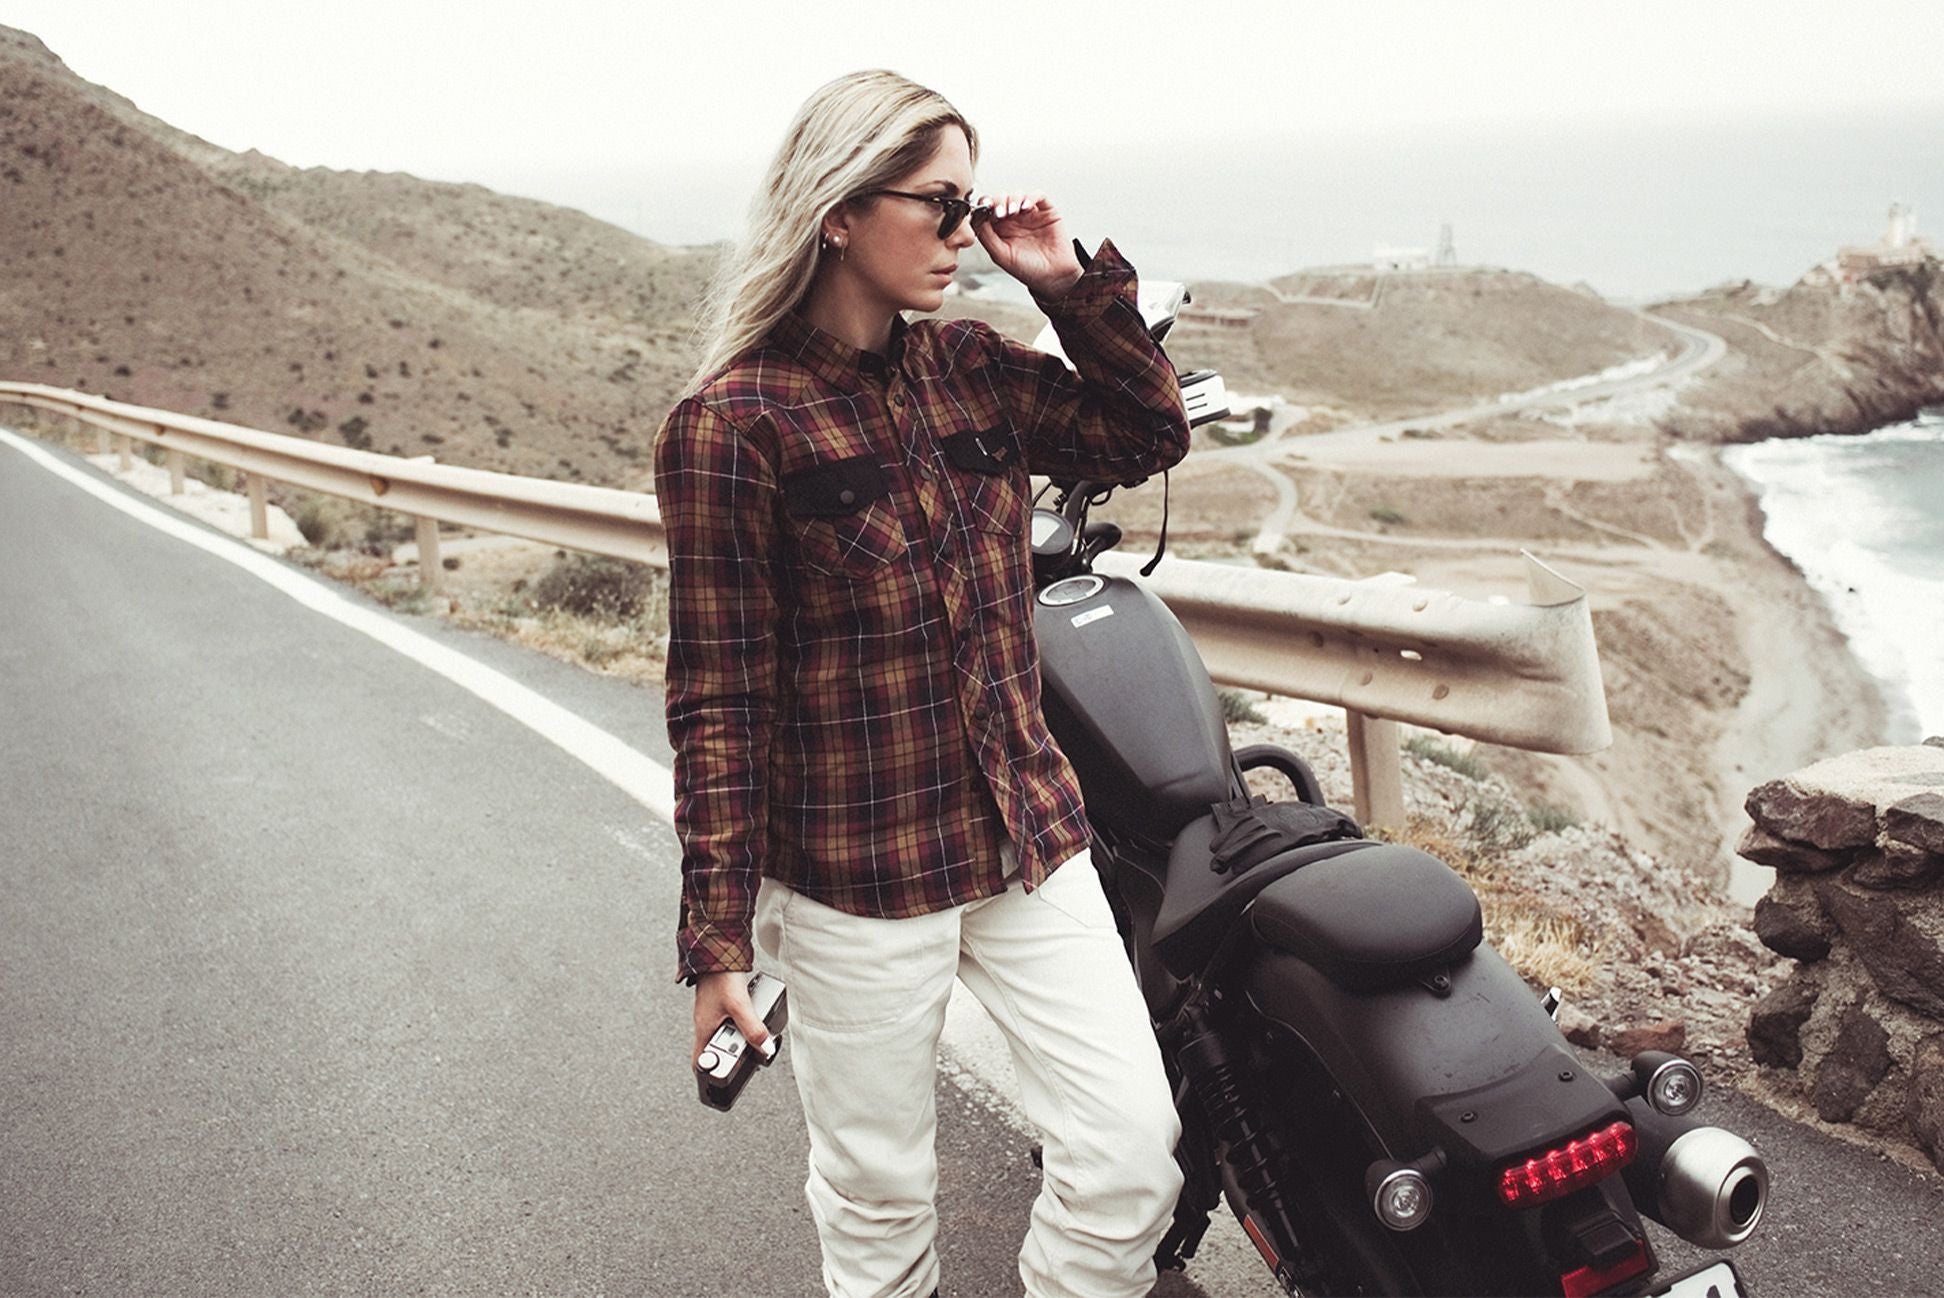 Does a flannel shirt make good motorcycle gear